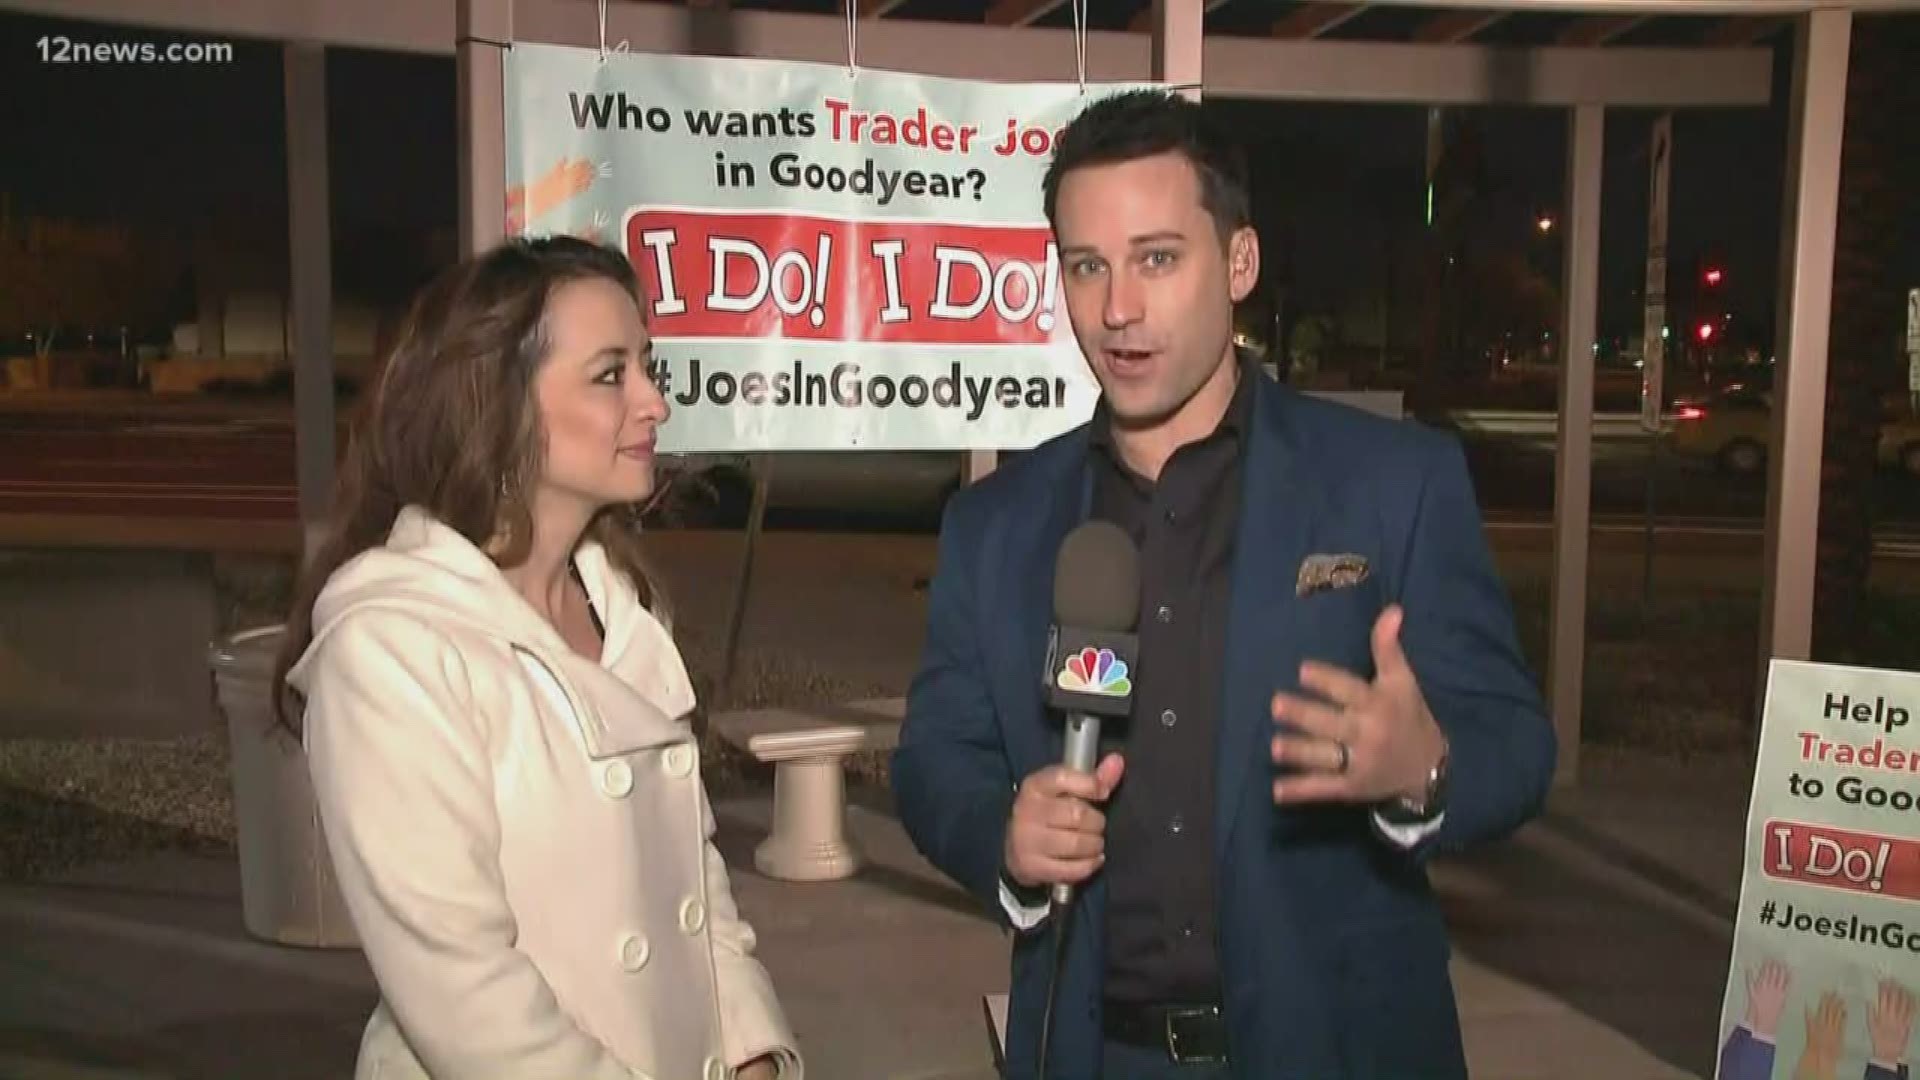 The City of Goodyear wants a Trader Joe's in their neck of the woods. Ryan Cody has more on the story.